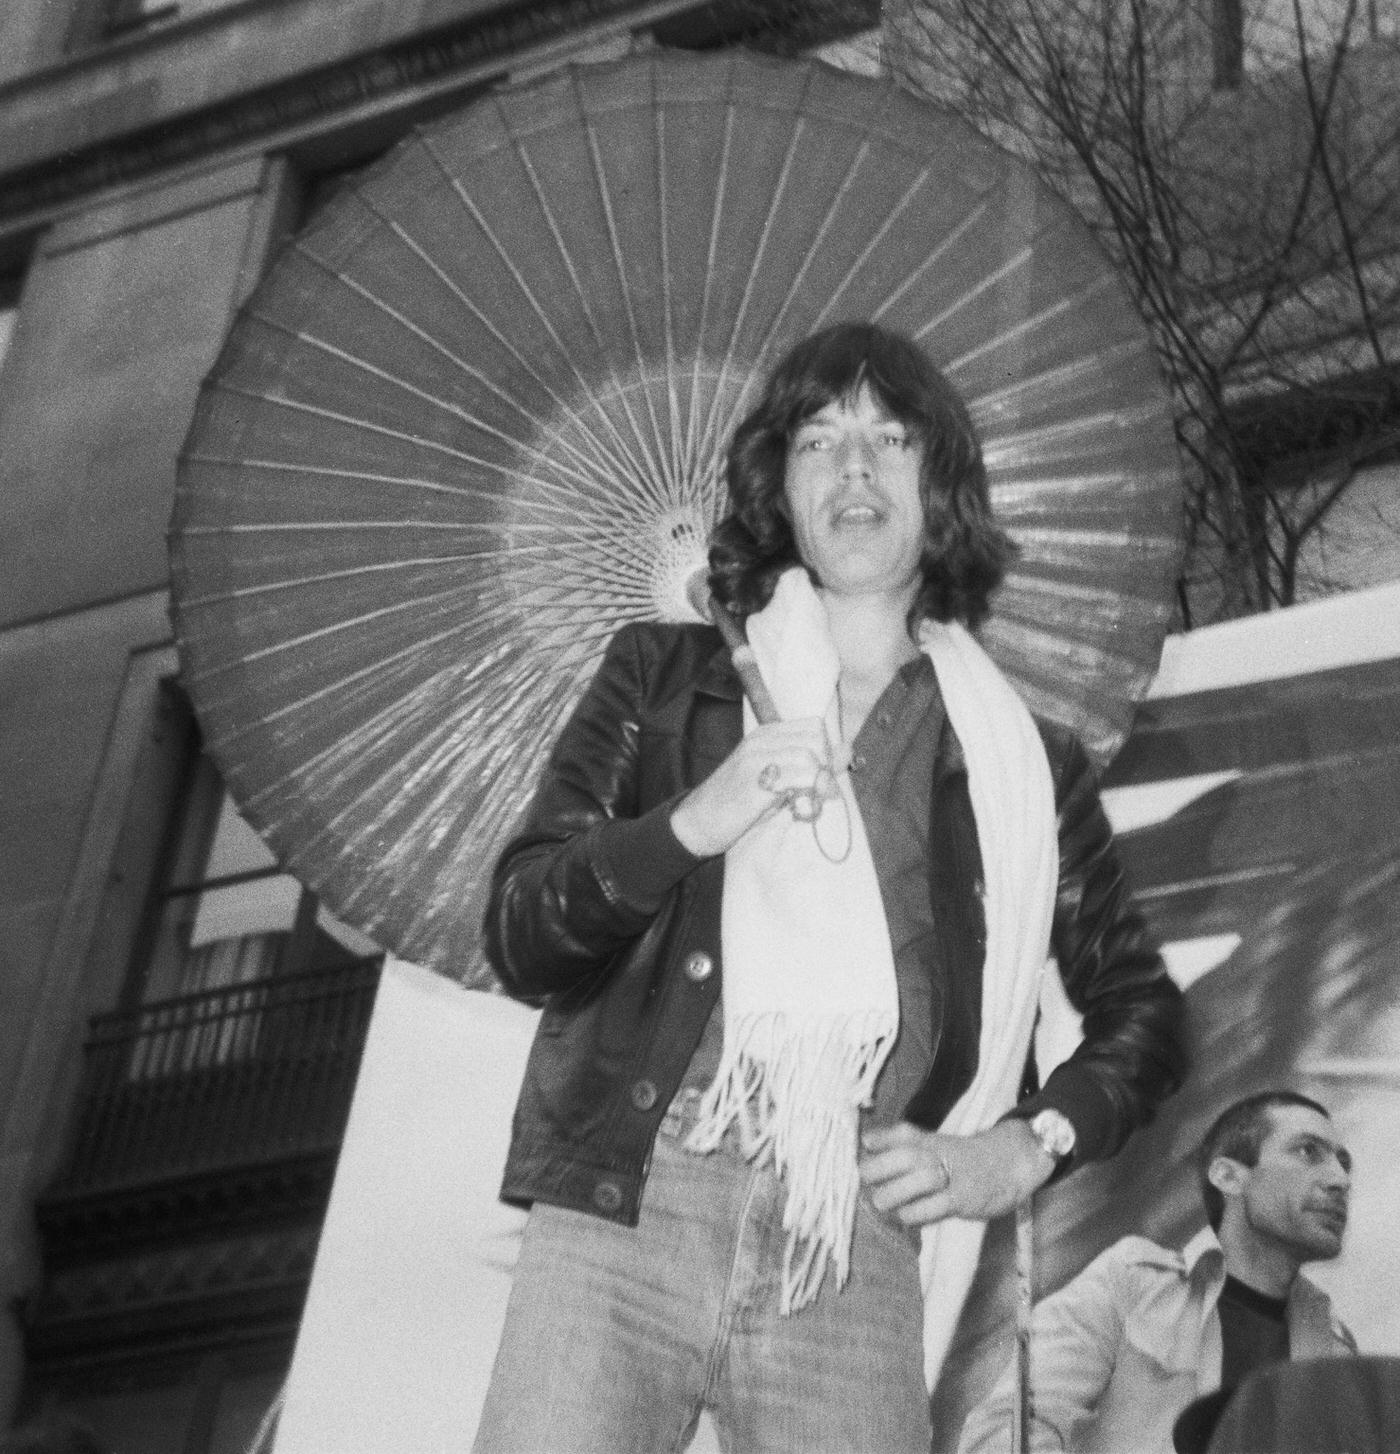 Mick Jagger poses with a parasol, while Charlie Watts is visible, as The Rolling Stones perform on a flatbed truck on Fifth Avenue, New York City, 1975.